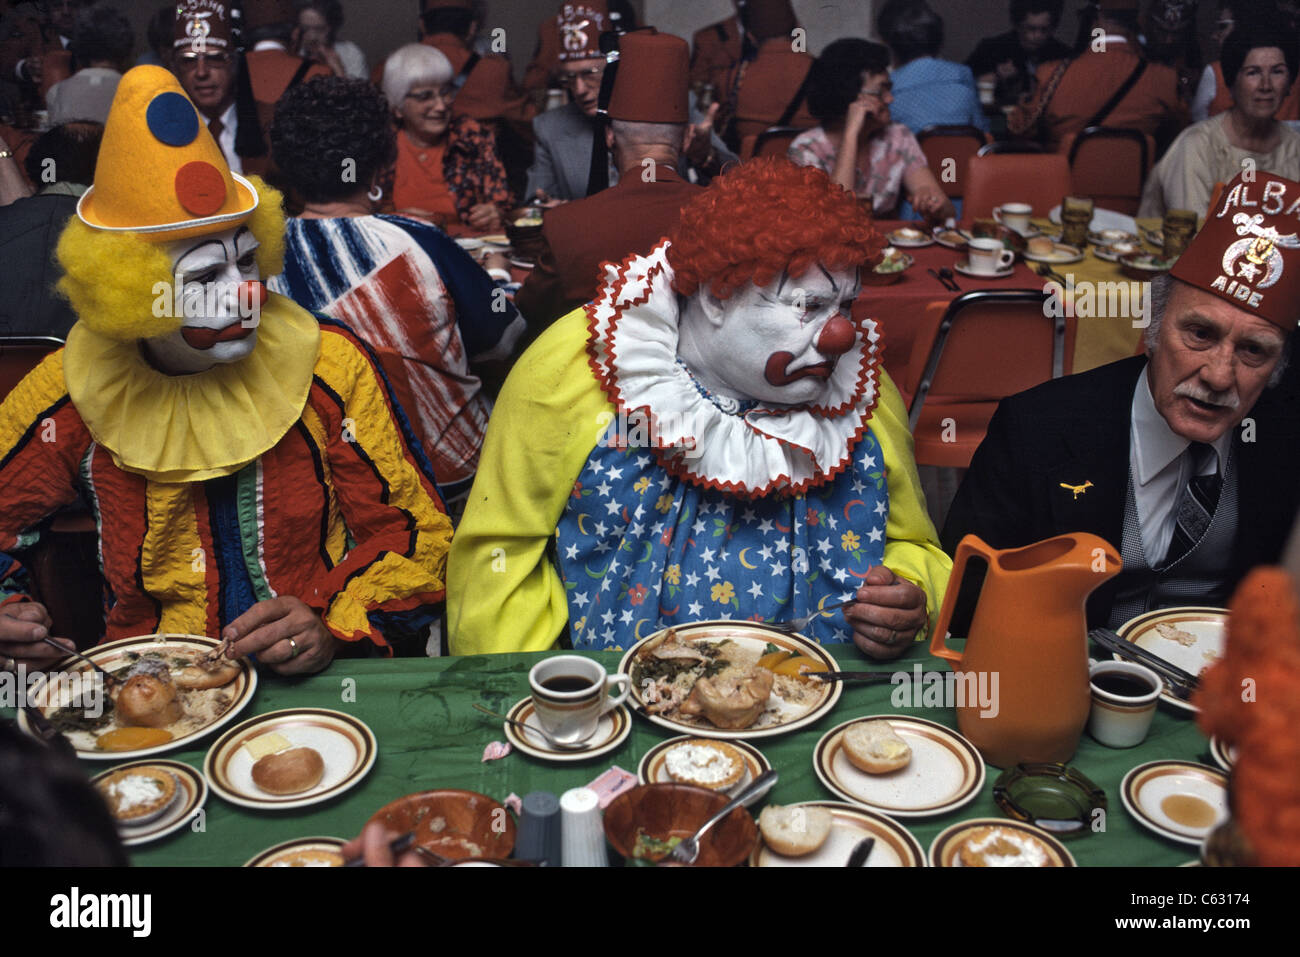 Shriners event with clowns in full make-up eating Stock Photo